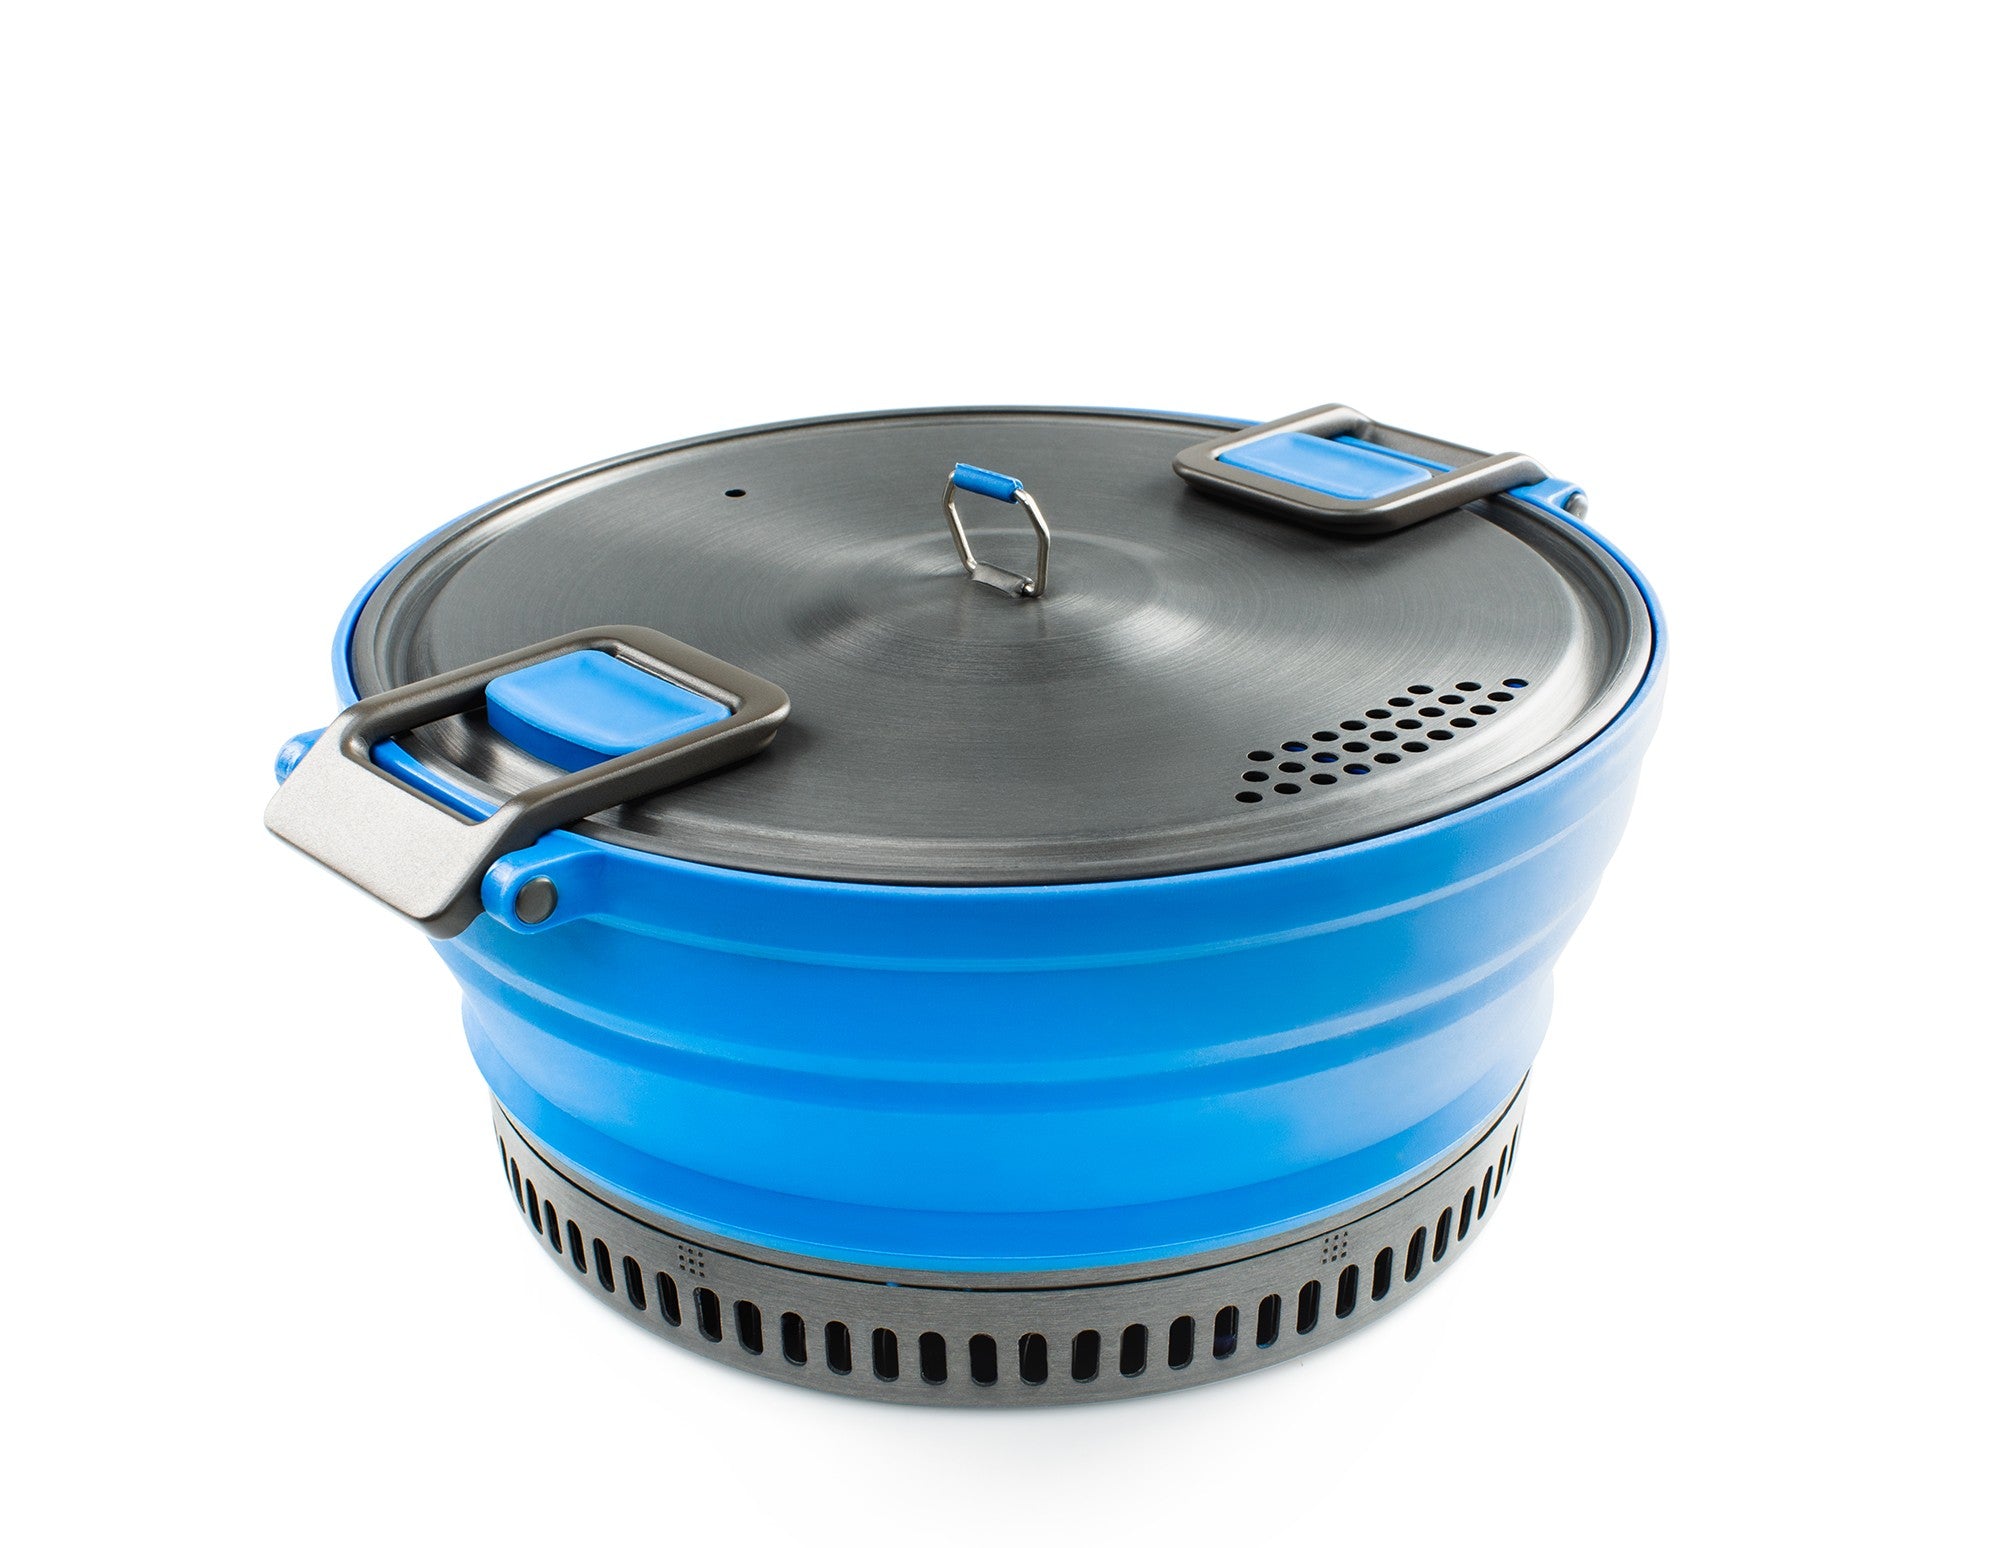 spoel zaad Oven ESCAPE HS 2 Liter Pot, Collapsible Camping Cook Pot | GSI Outdoors